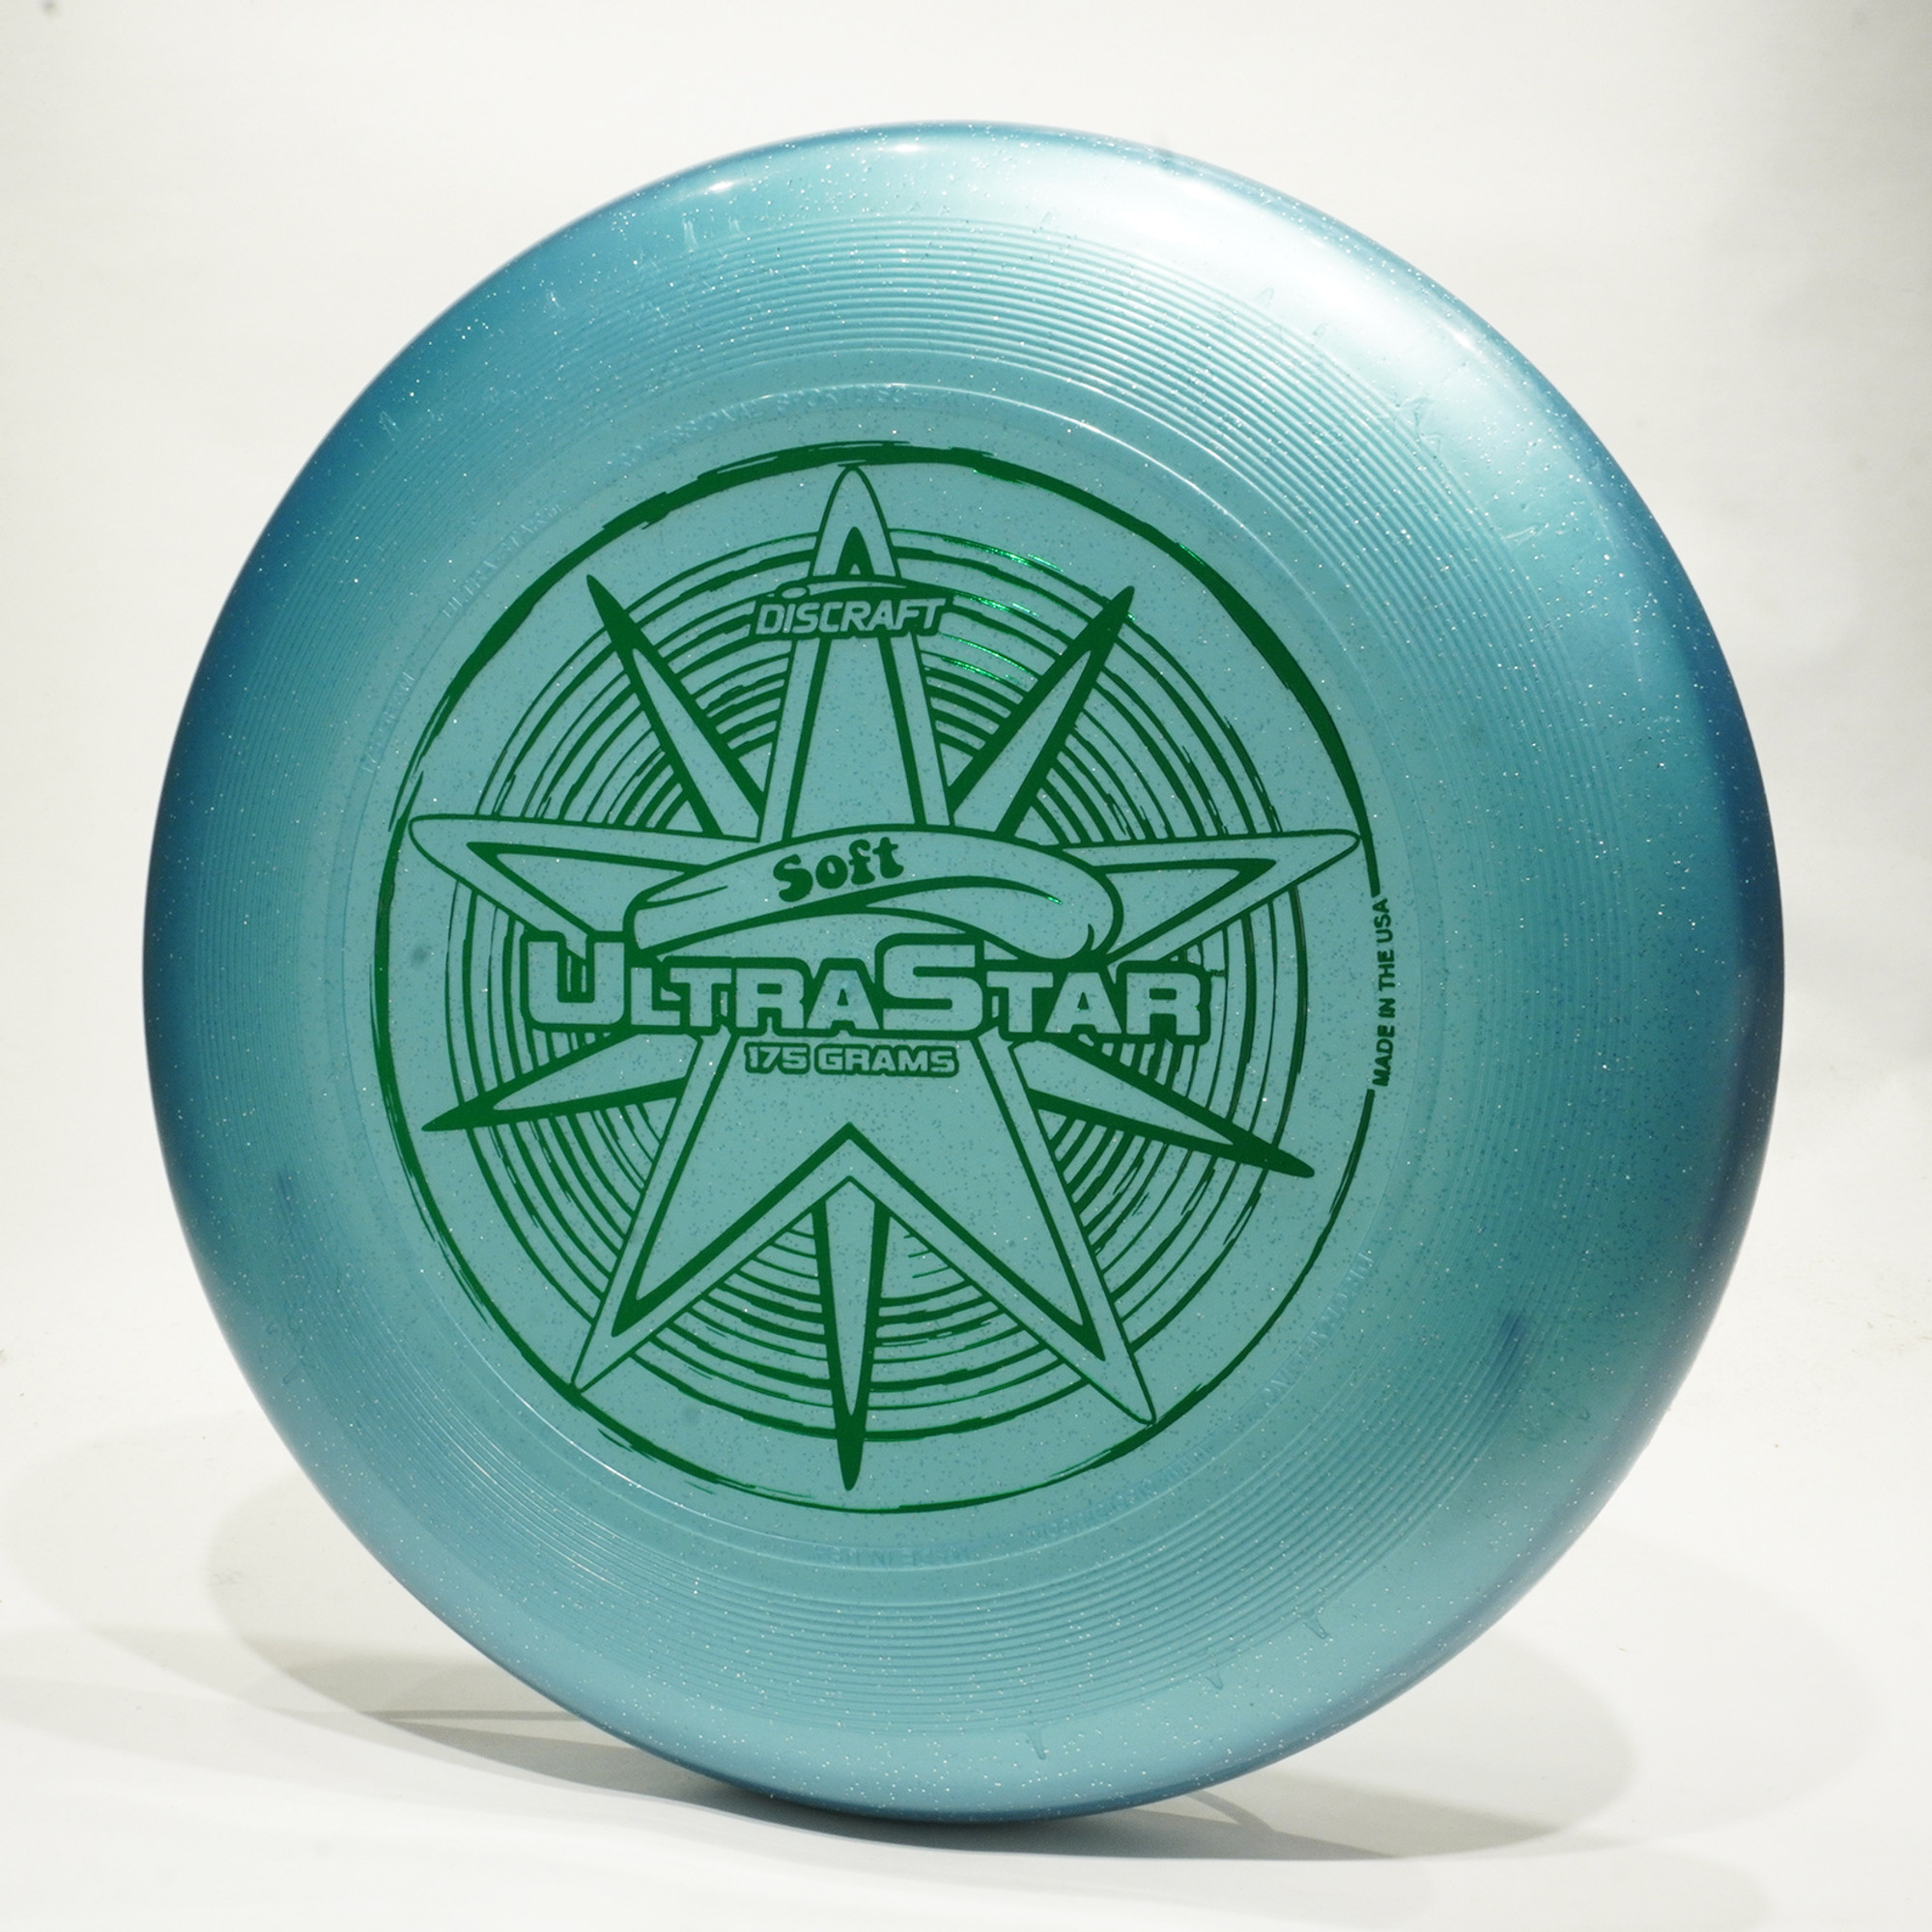 Discraft UltraStar Flexible, Easy to Frisbee - THE LIFE ACTION SPORTING GOODS STORE